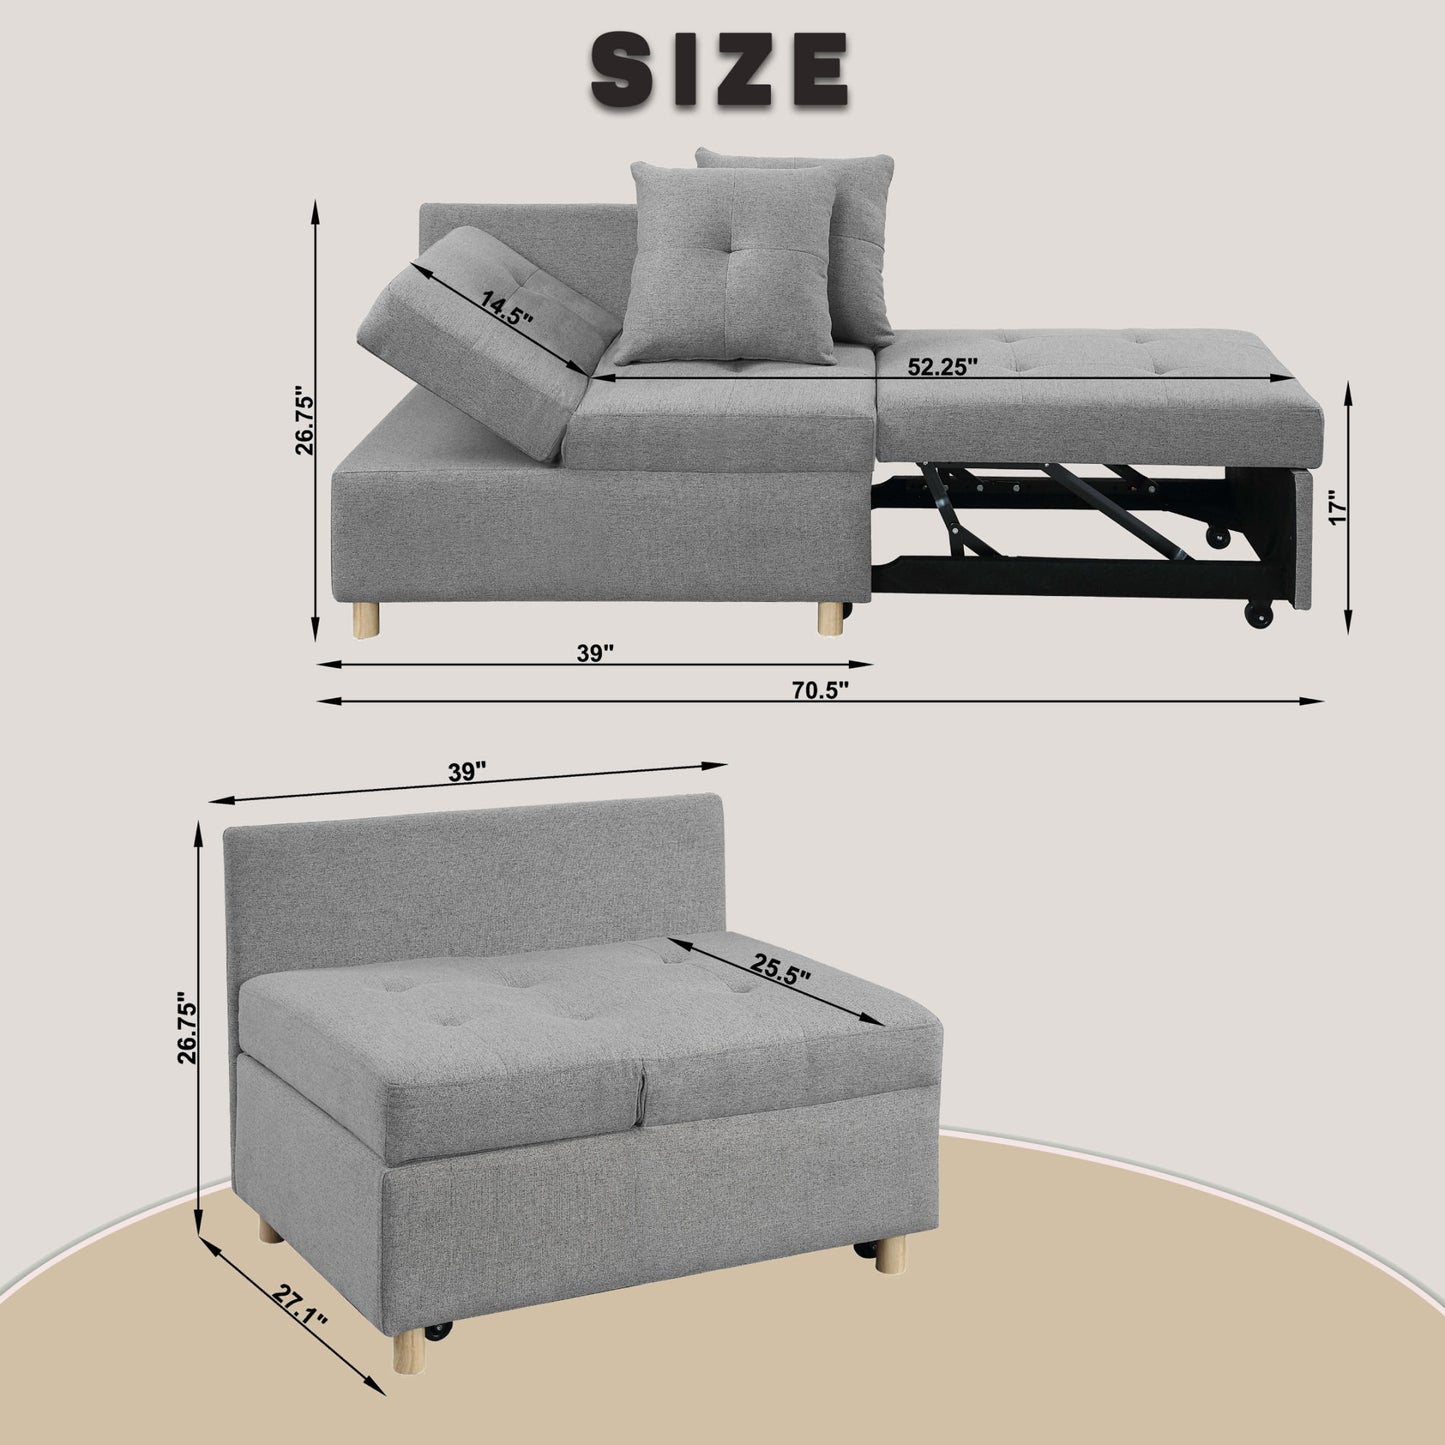 4-in-1 Convertible Sofas & Couches, Single Extendable Sofa with 6 Position Adjustable Back, Sofa Bed with 2 Pillows, Gray